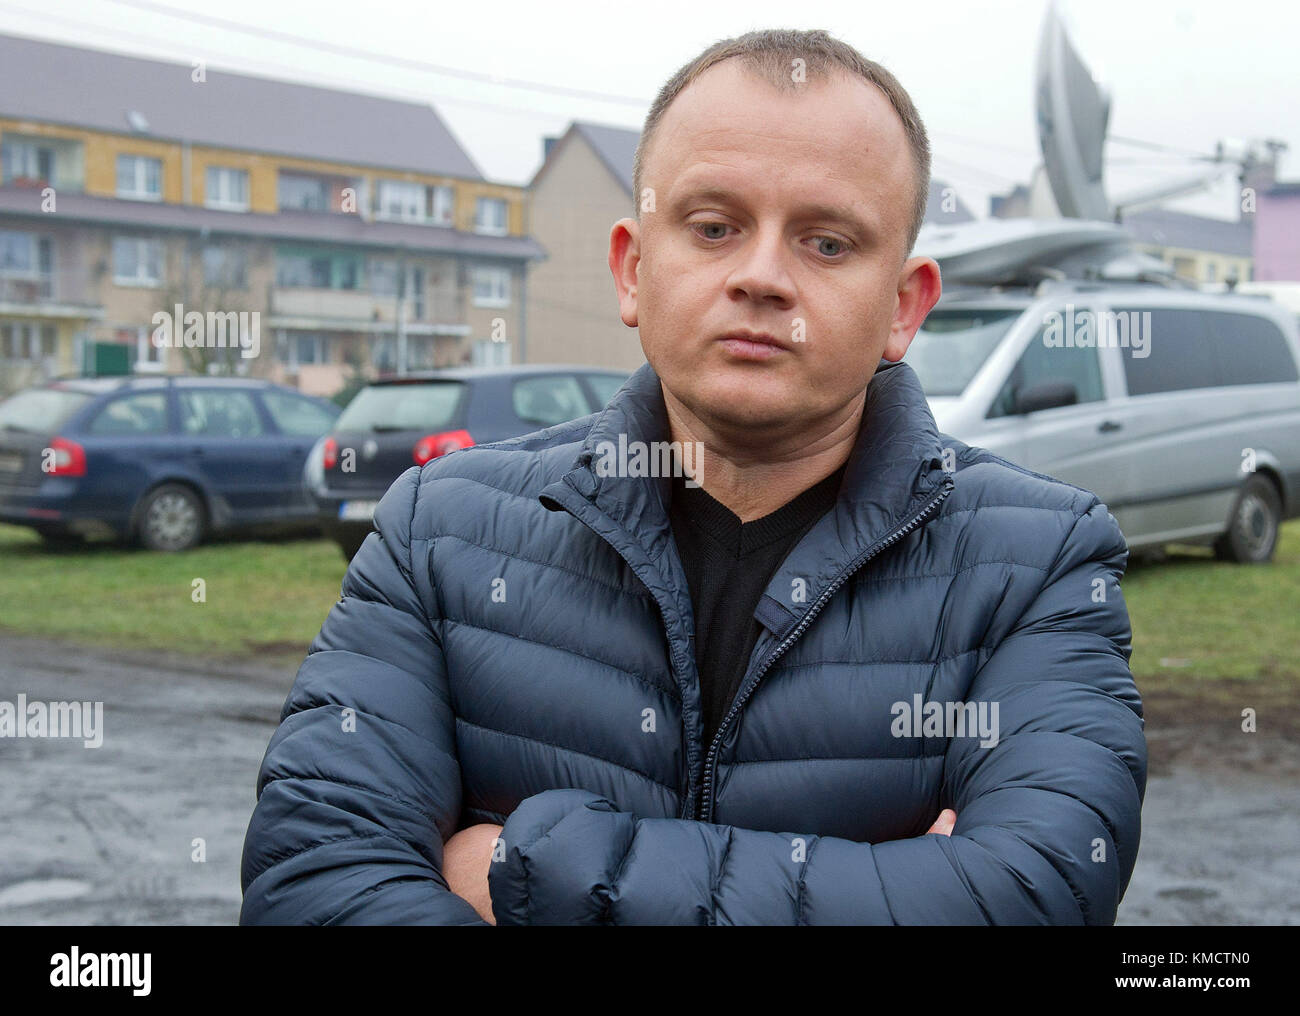 Sobiemysl, Poland. 20th Dec, 2016. ARCHIVE - The Polish haulage contractor Ariel Zurawski stands in front of journalists during a press conference in Sobiemysl, Poland, 20 December 2016. His truck became the vehicle for terrorism. His cousin and driver of the truck was shot. One year after the terror attack, Zurawski is still plagued by grief and financial worries. Credit: Stefan Sauer/dpa-Zentralbild/dpa/Alamy Live News Stock Photo